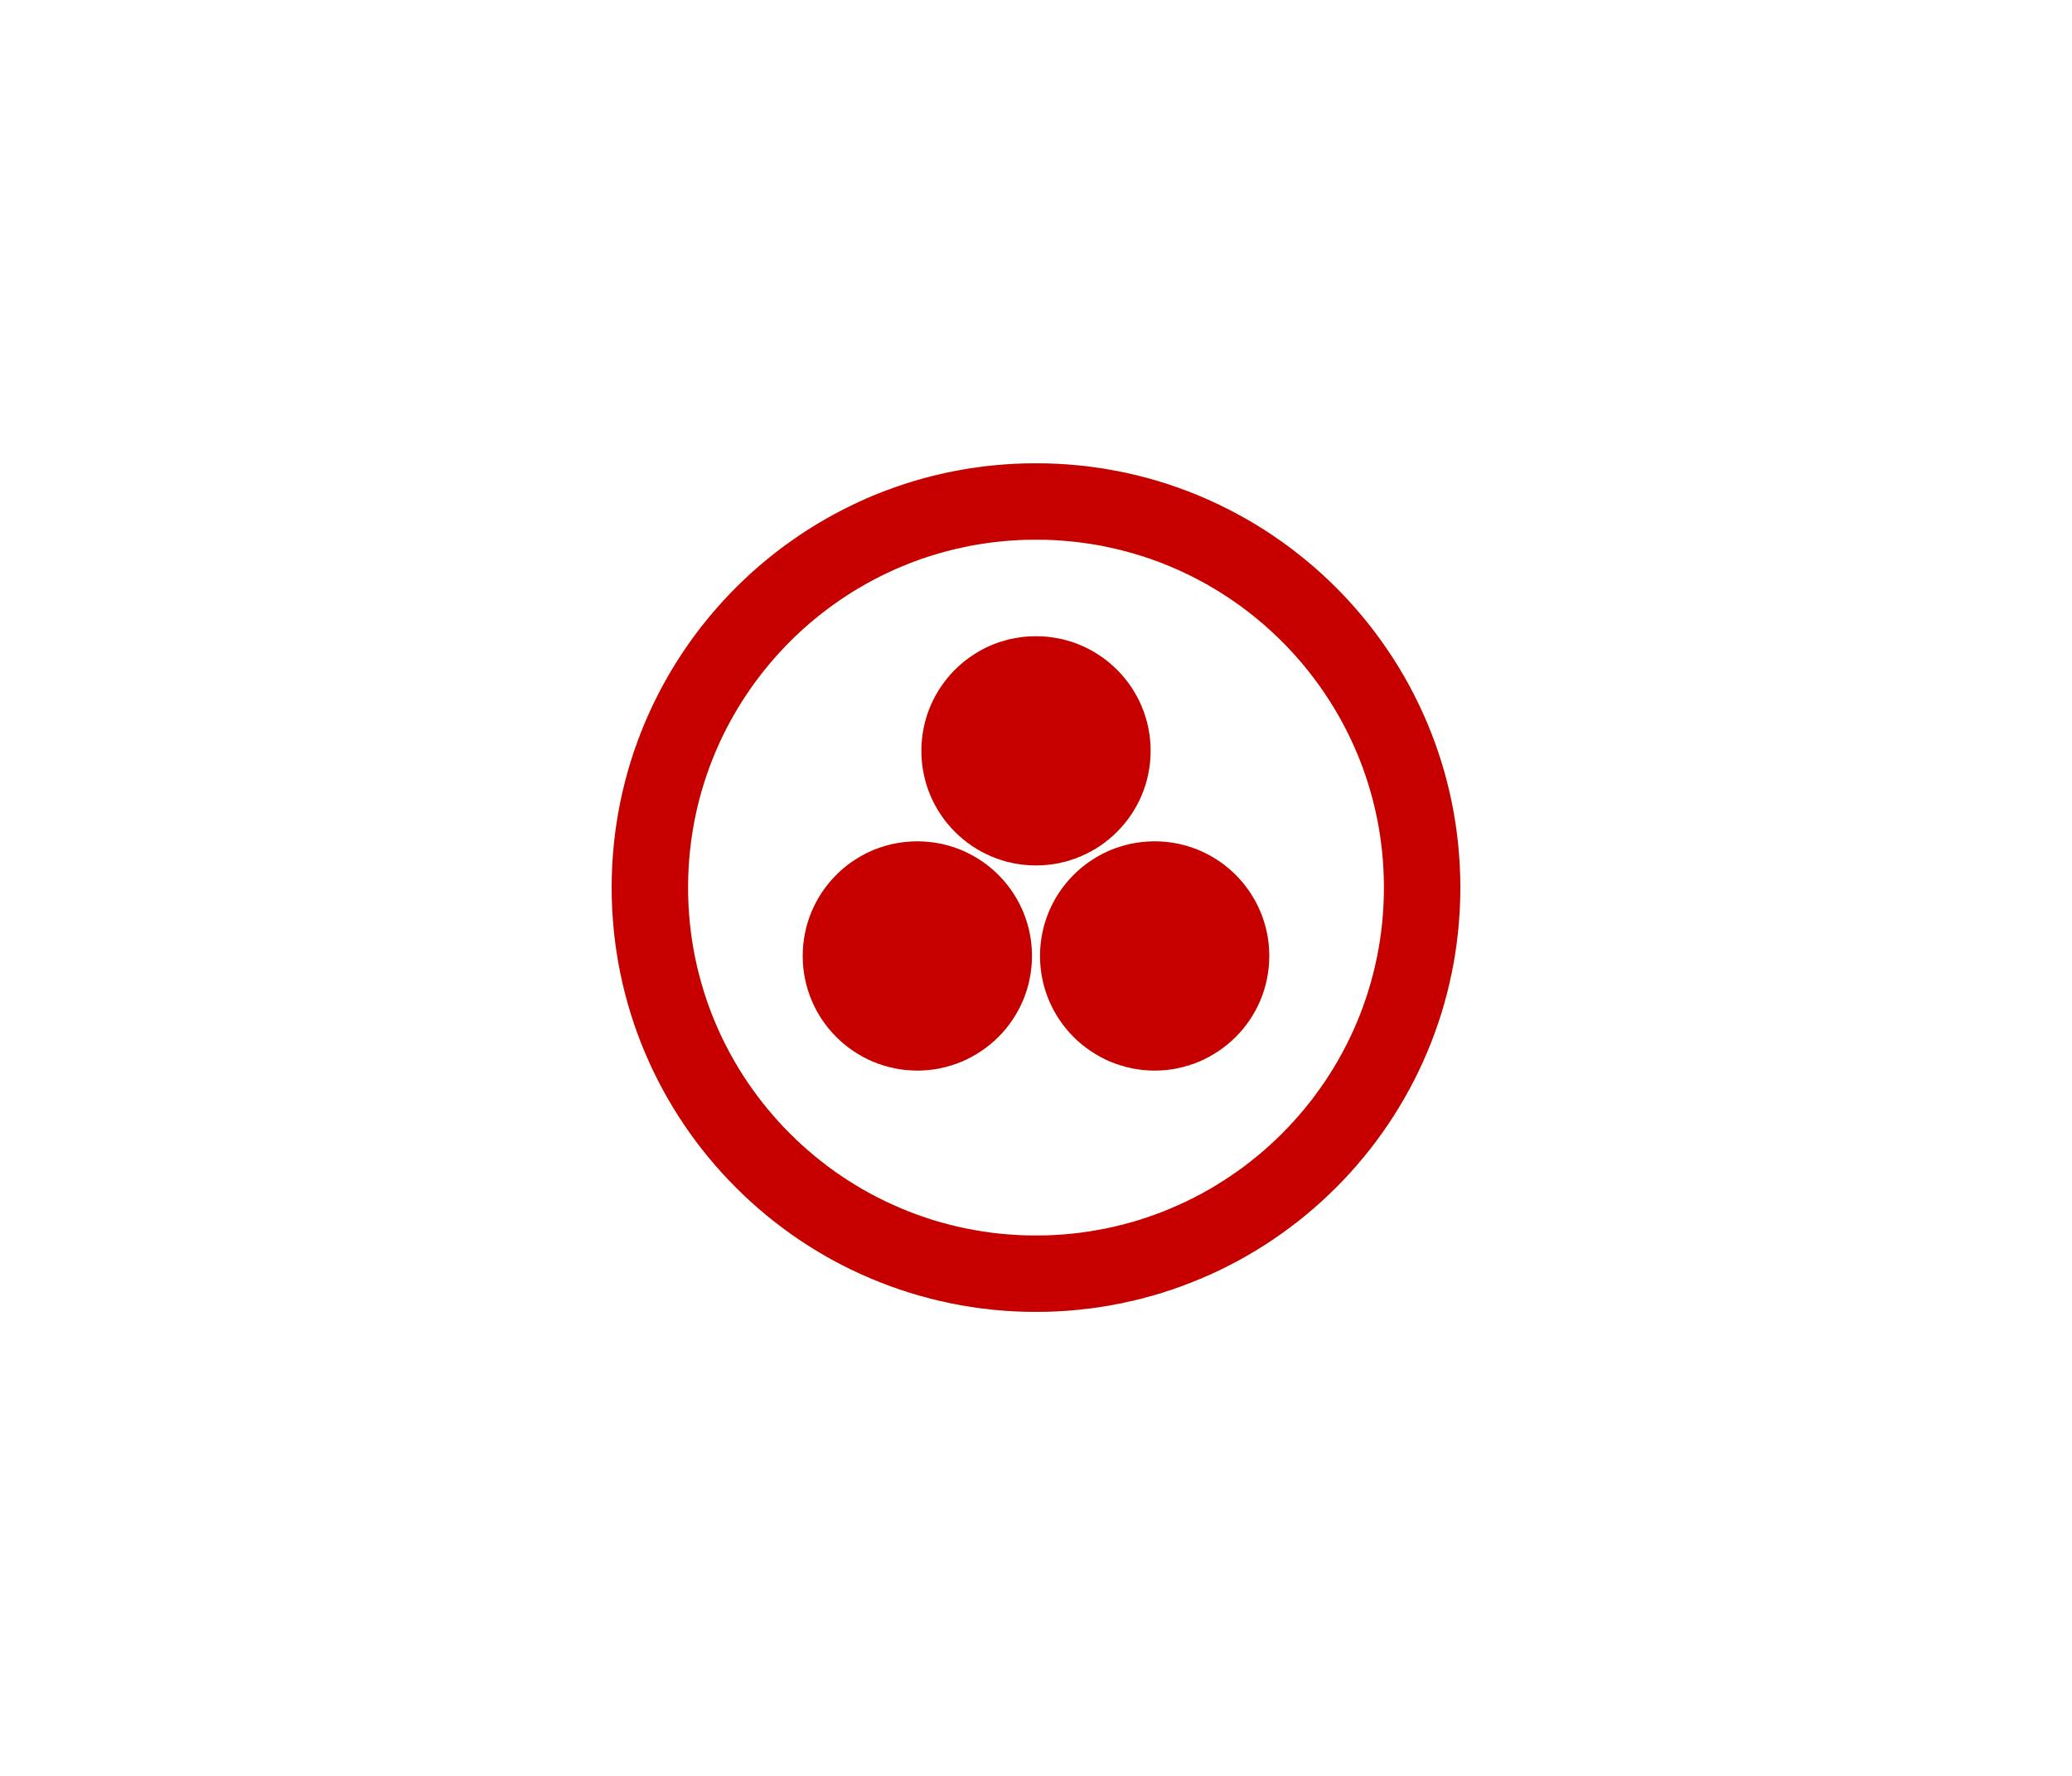 The Pax Cultura emblem: a maroon on white emblem consisting of three solid circles in a surrounding circle.